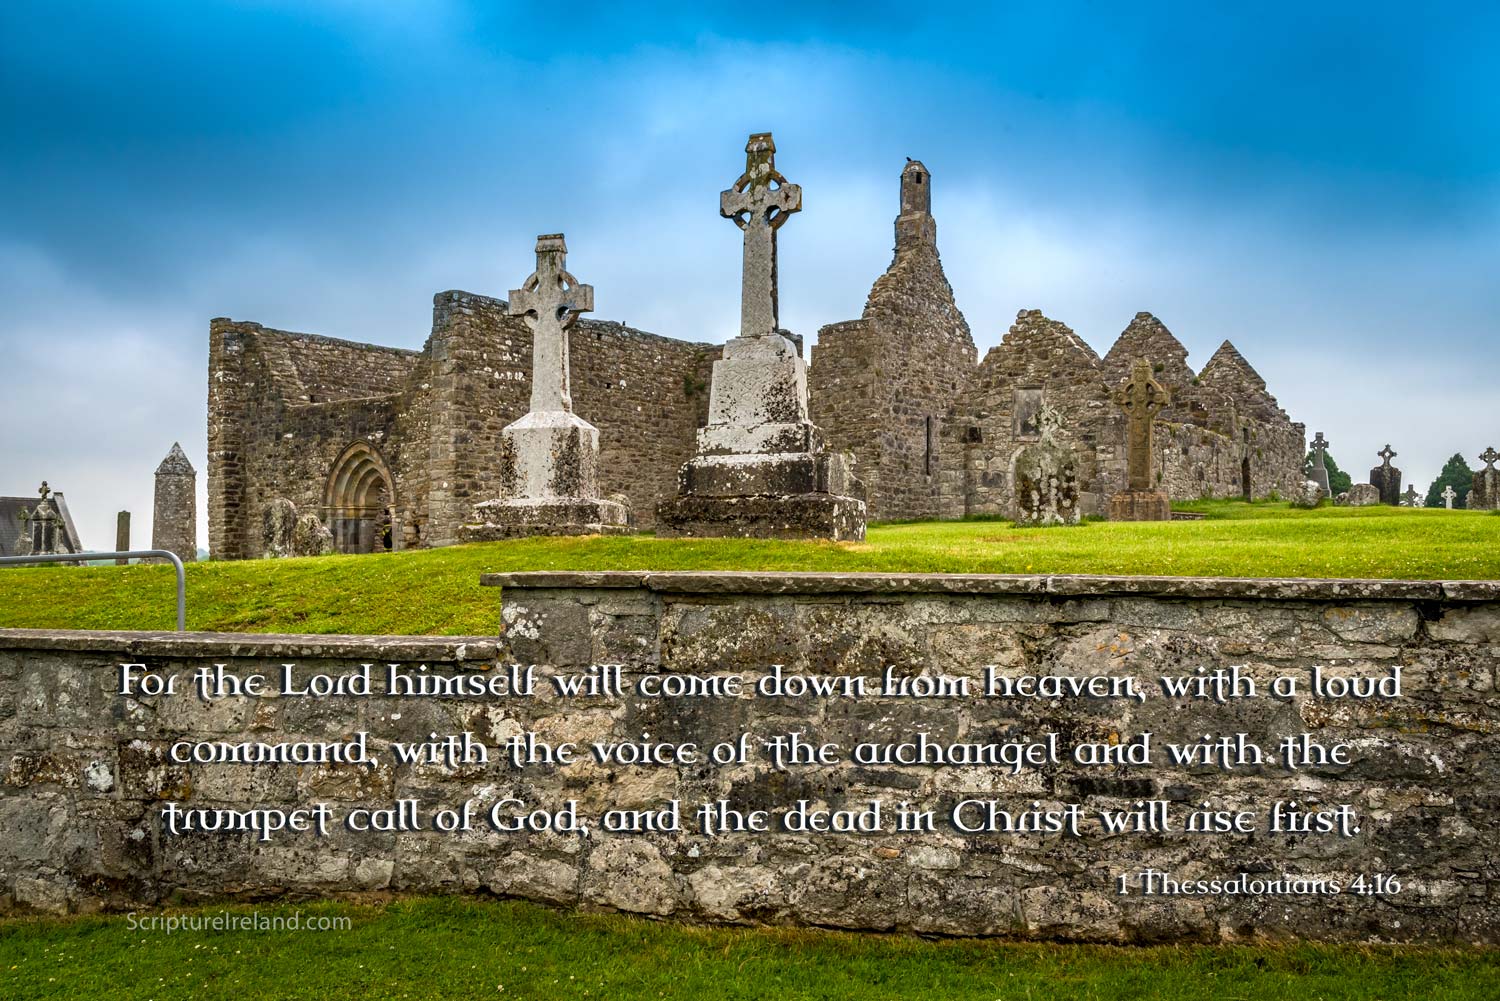 Clonmacnoise, County Offaly